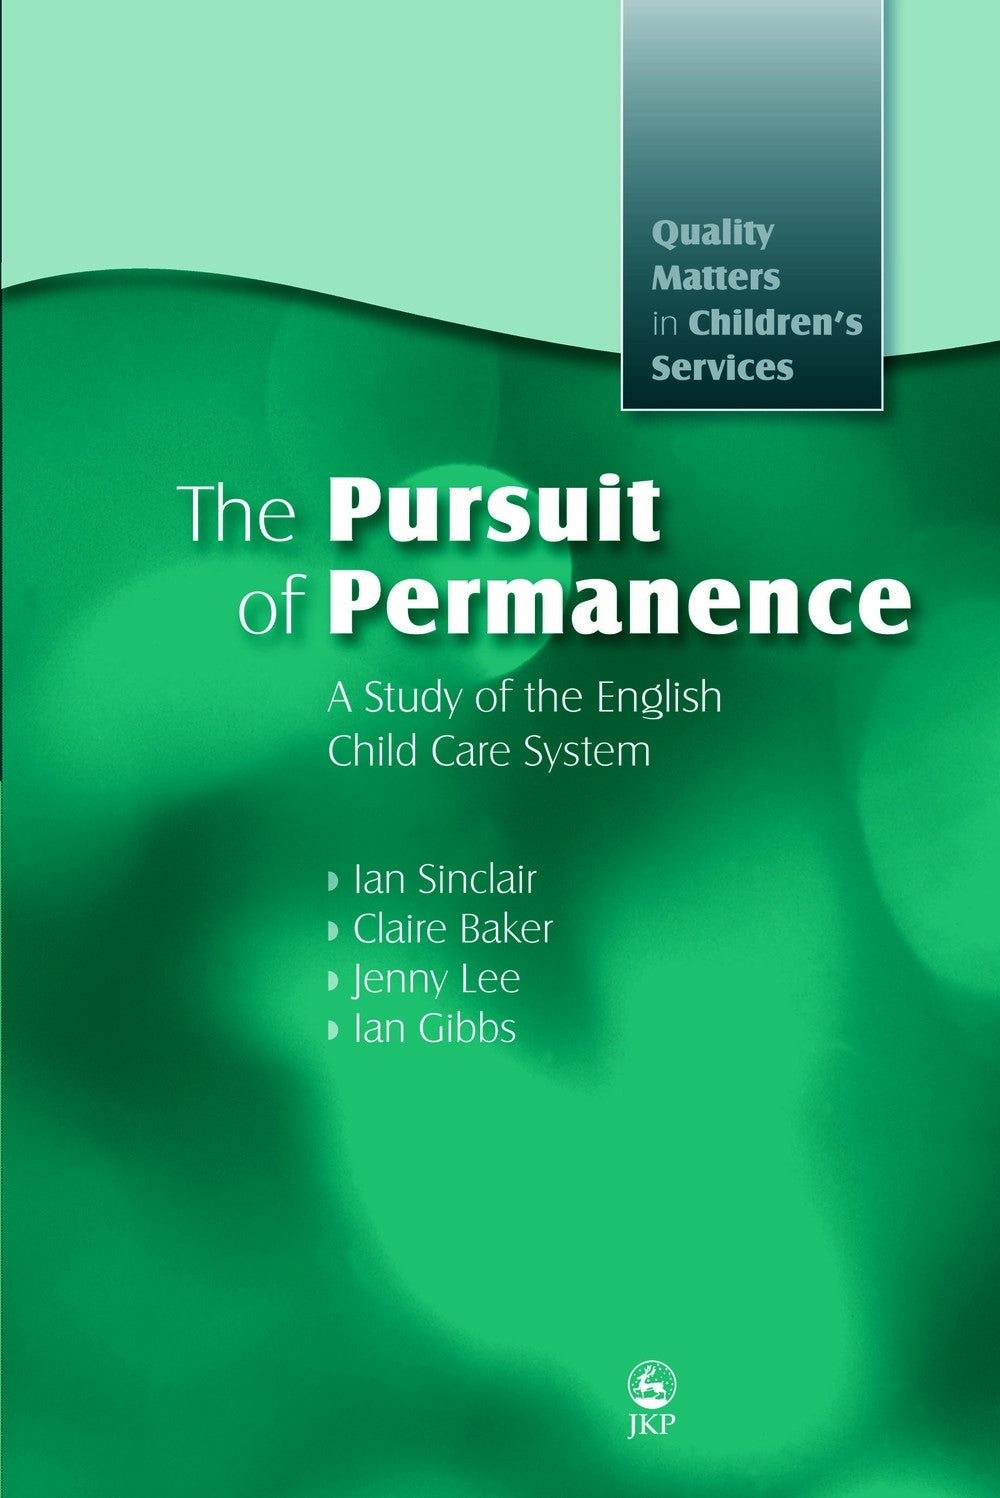 The Pursuit of Permanence by Ian Gibbs, Claire Baker, Jenny Lee, Ian Sinclair